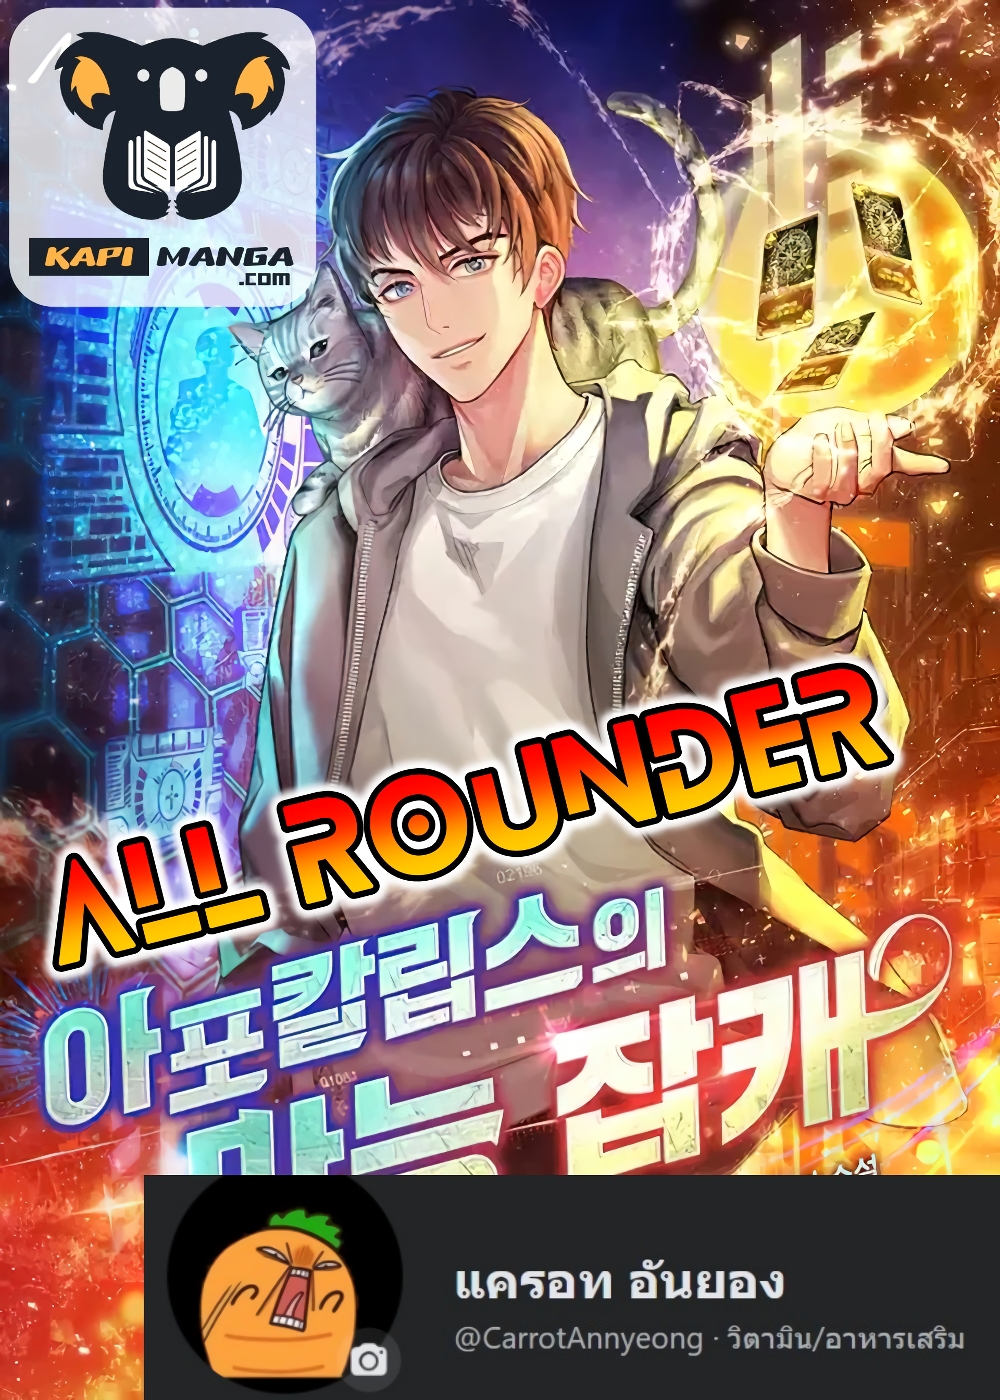 All Rounder 7 (1)